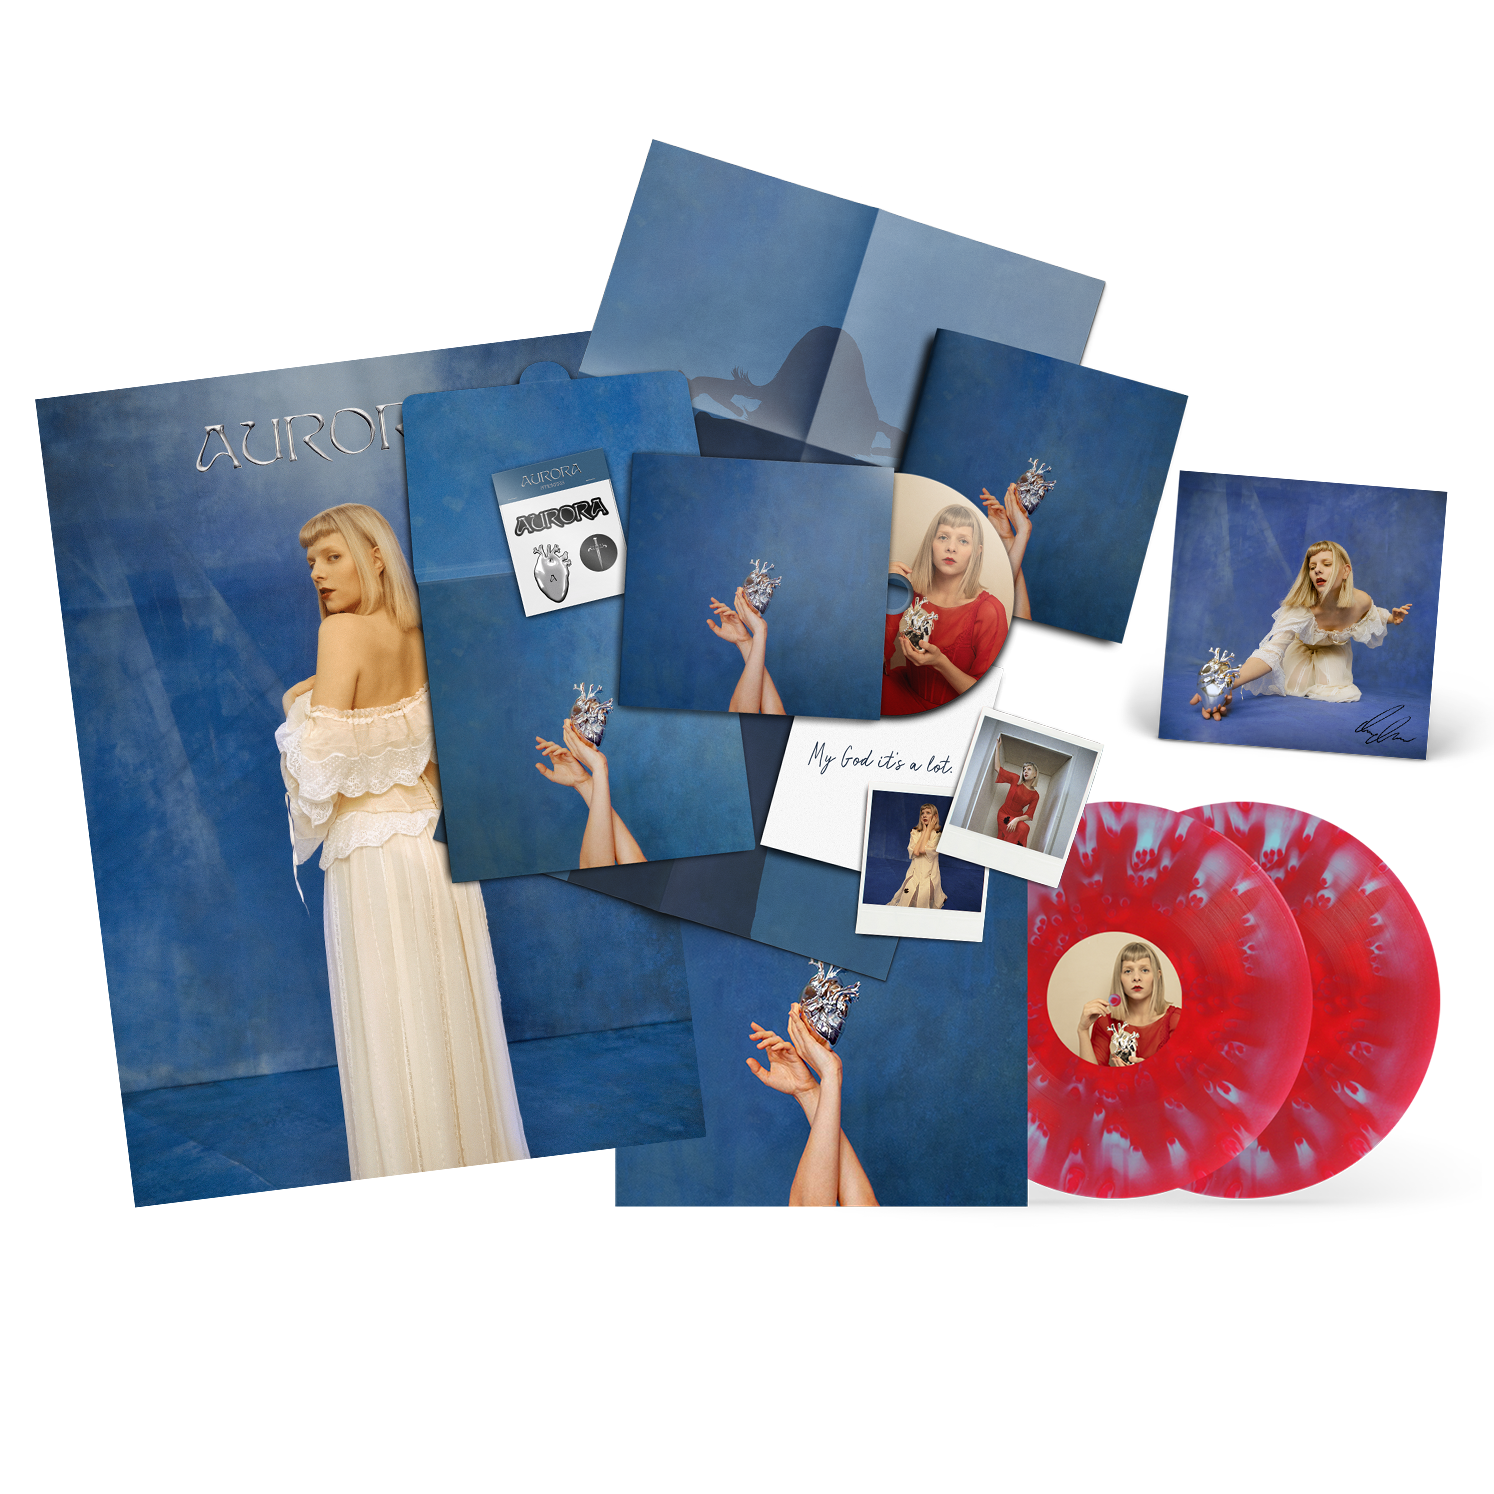 What Happened To The Heart? Exclusive Fanpack, Exclusive 2LP, Poster & Signed Art Card